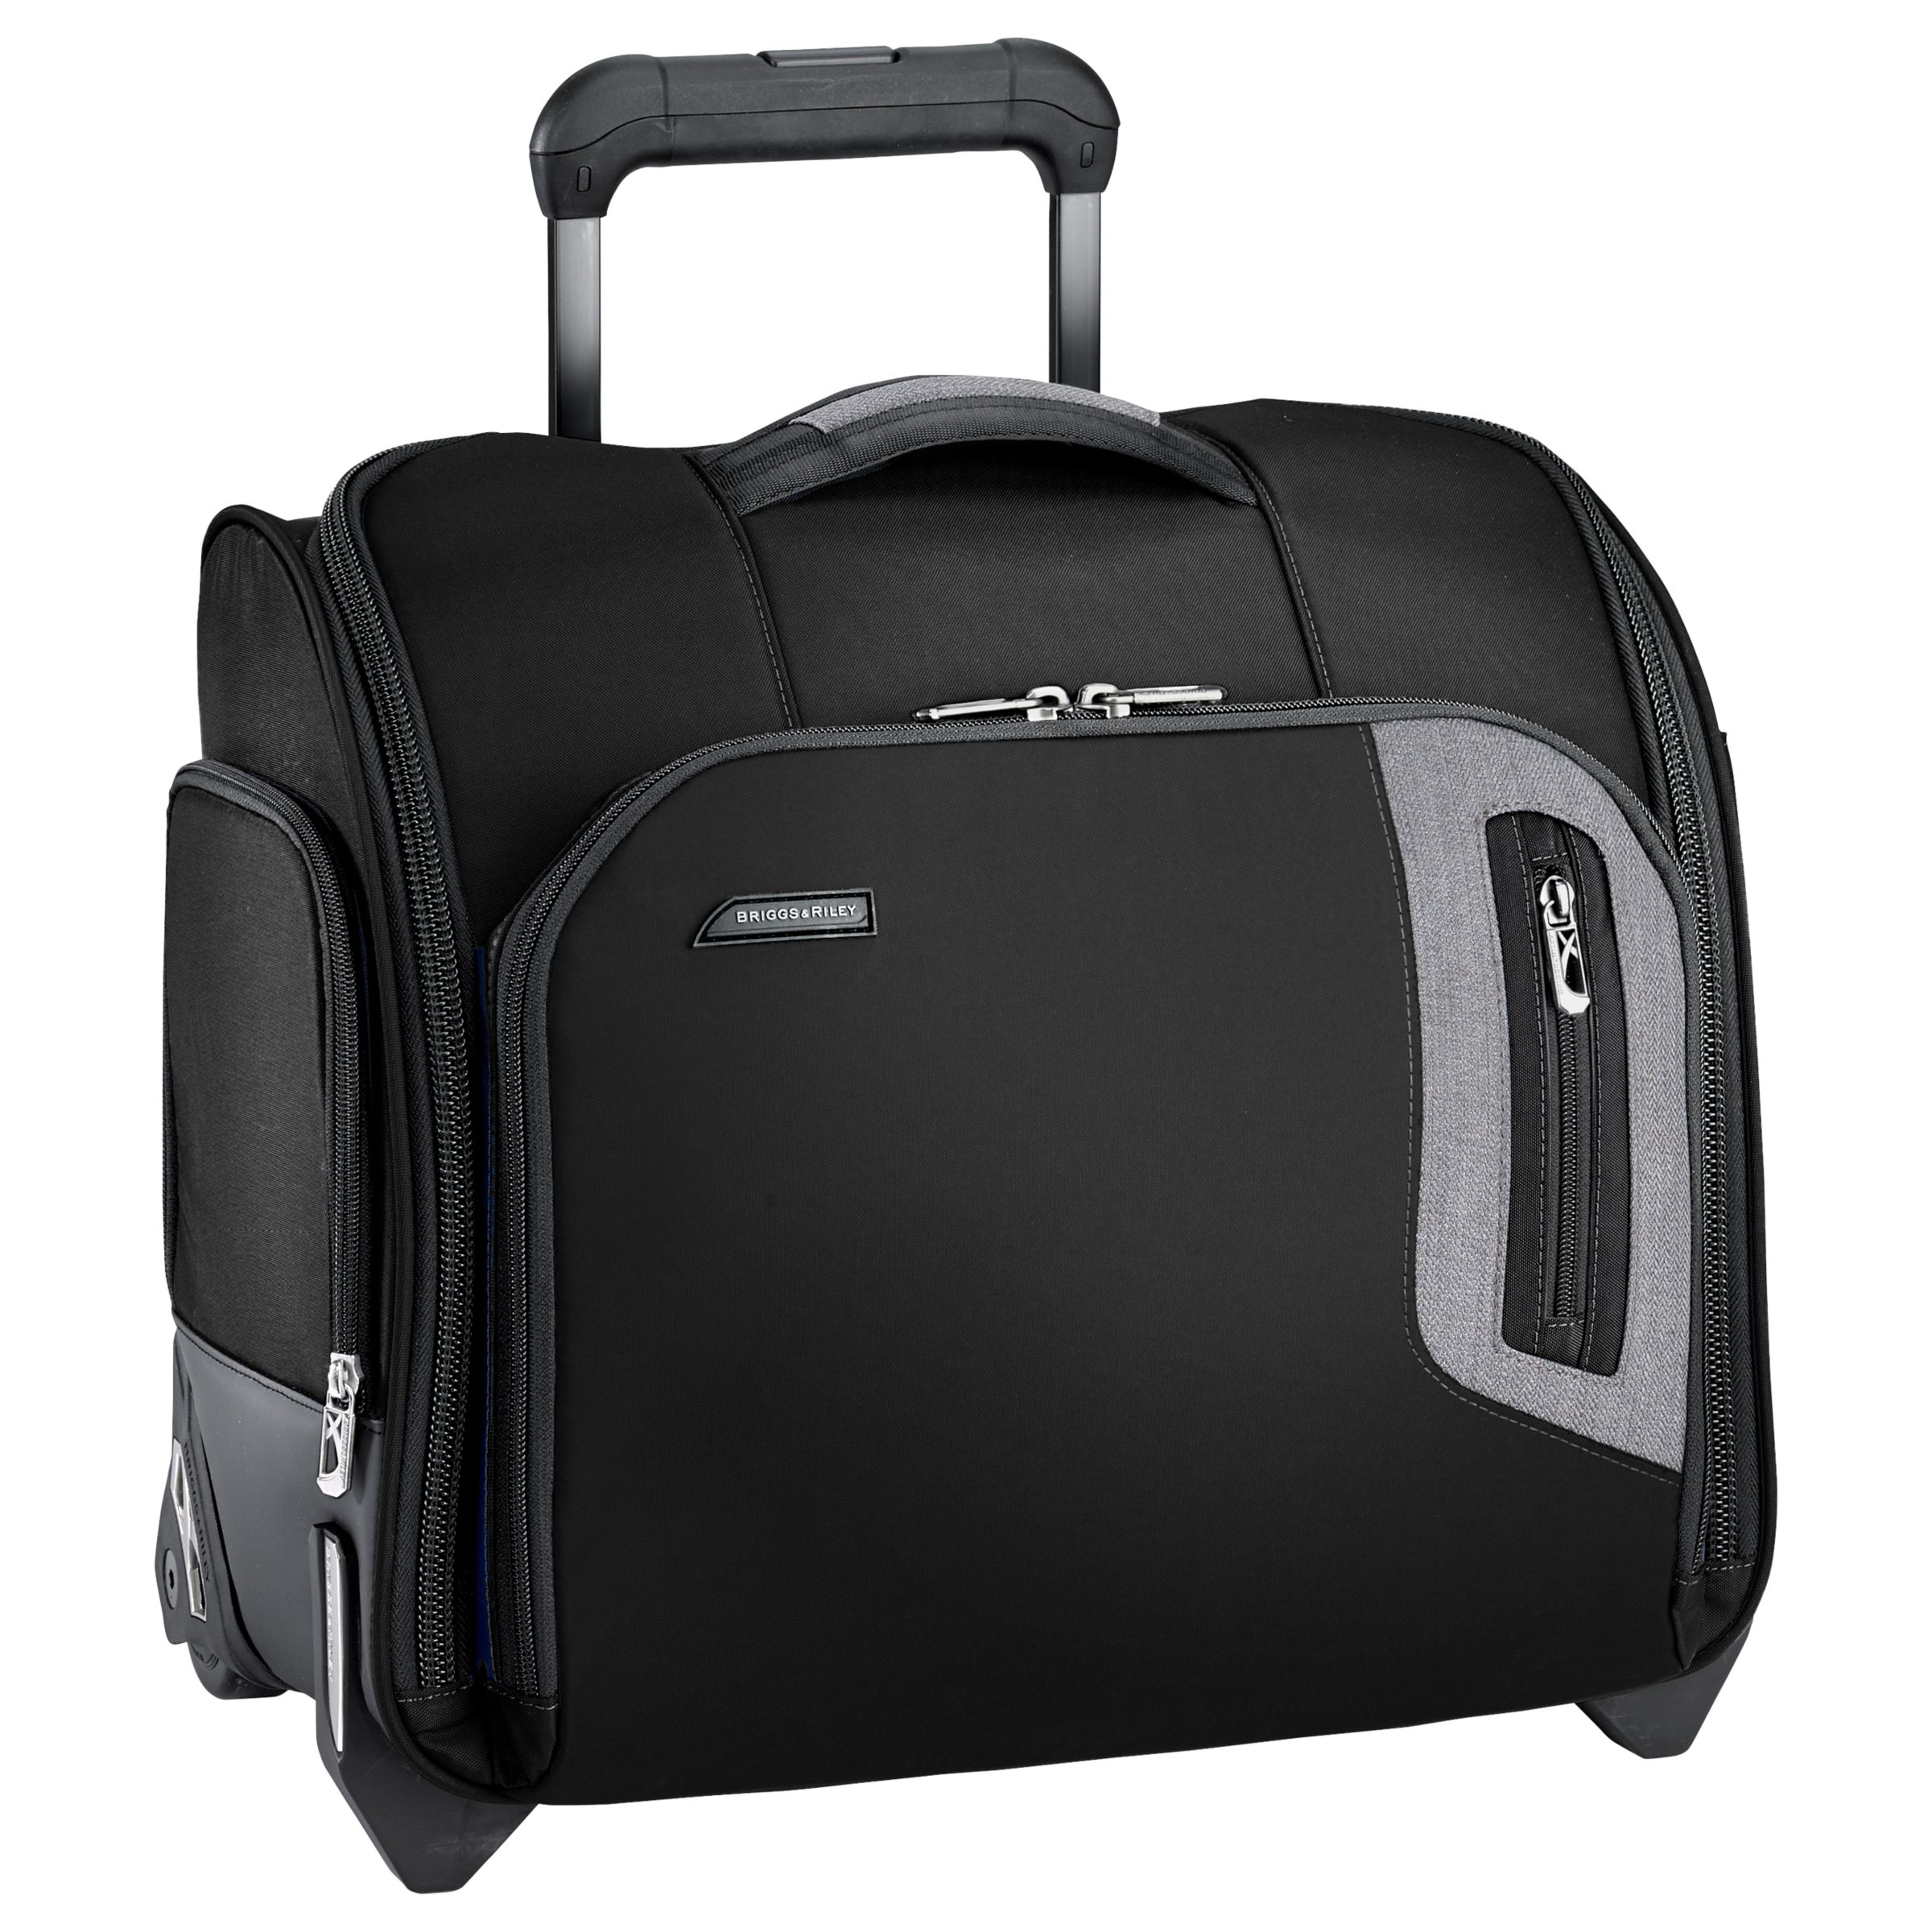 Briggs & Riley BRX Rolling Cabin Case Review